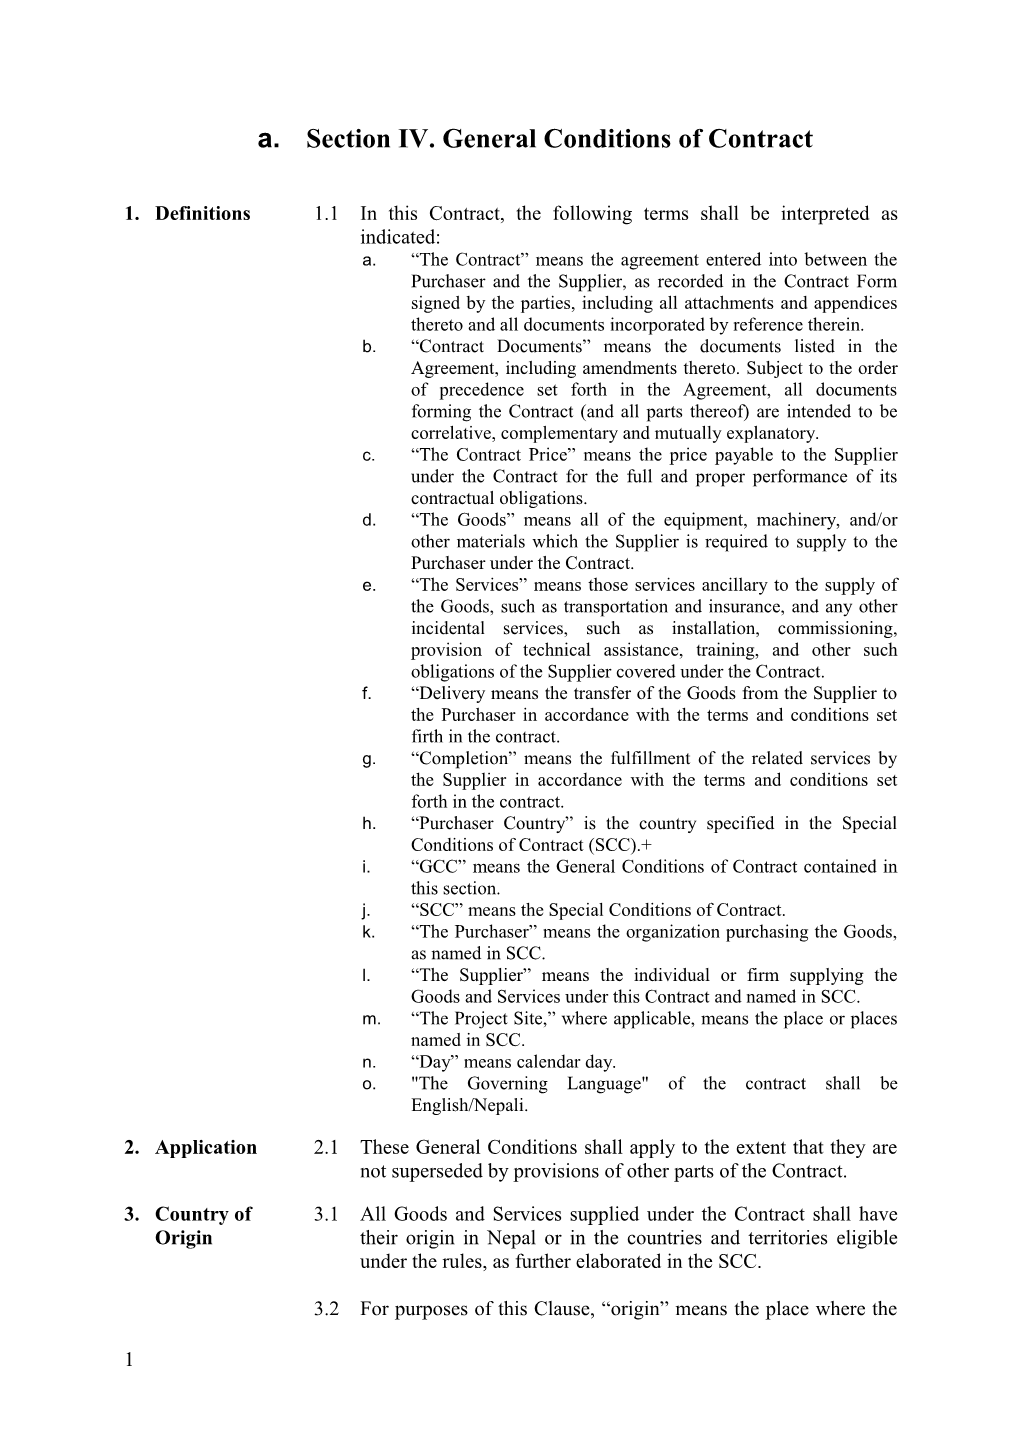 Section IV. General Conditions of Contract